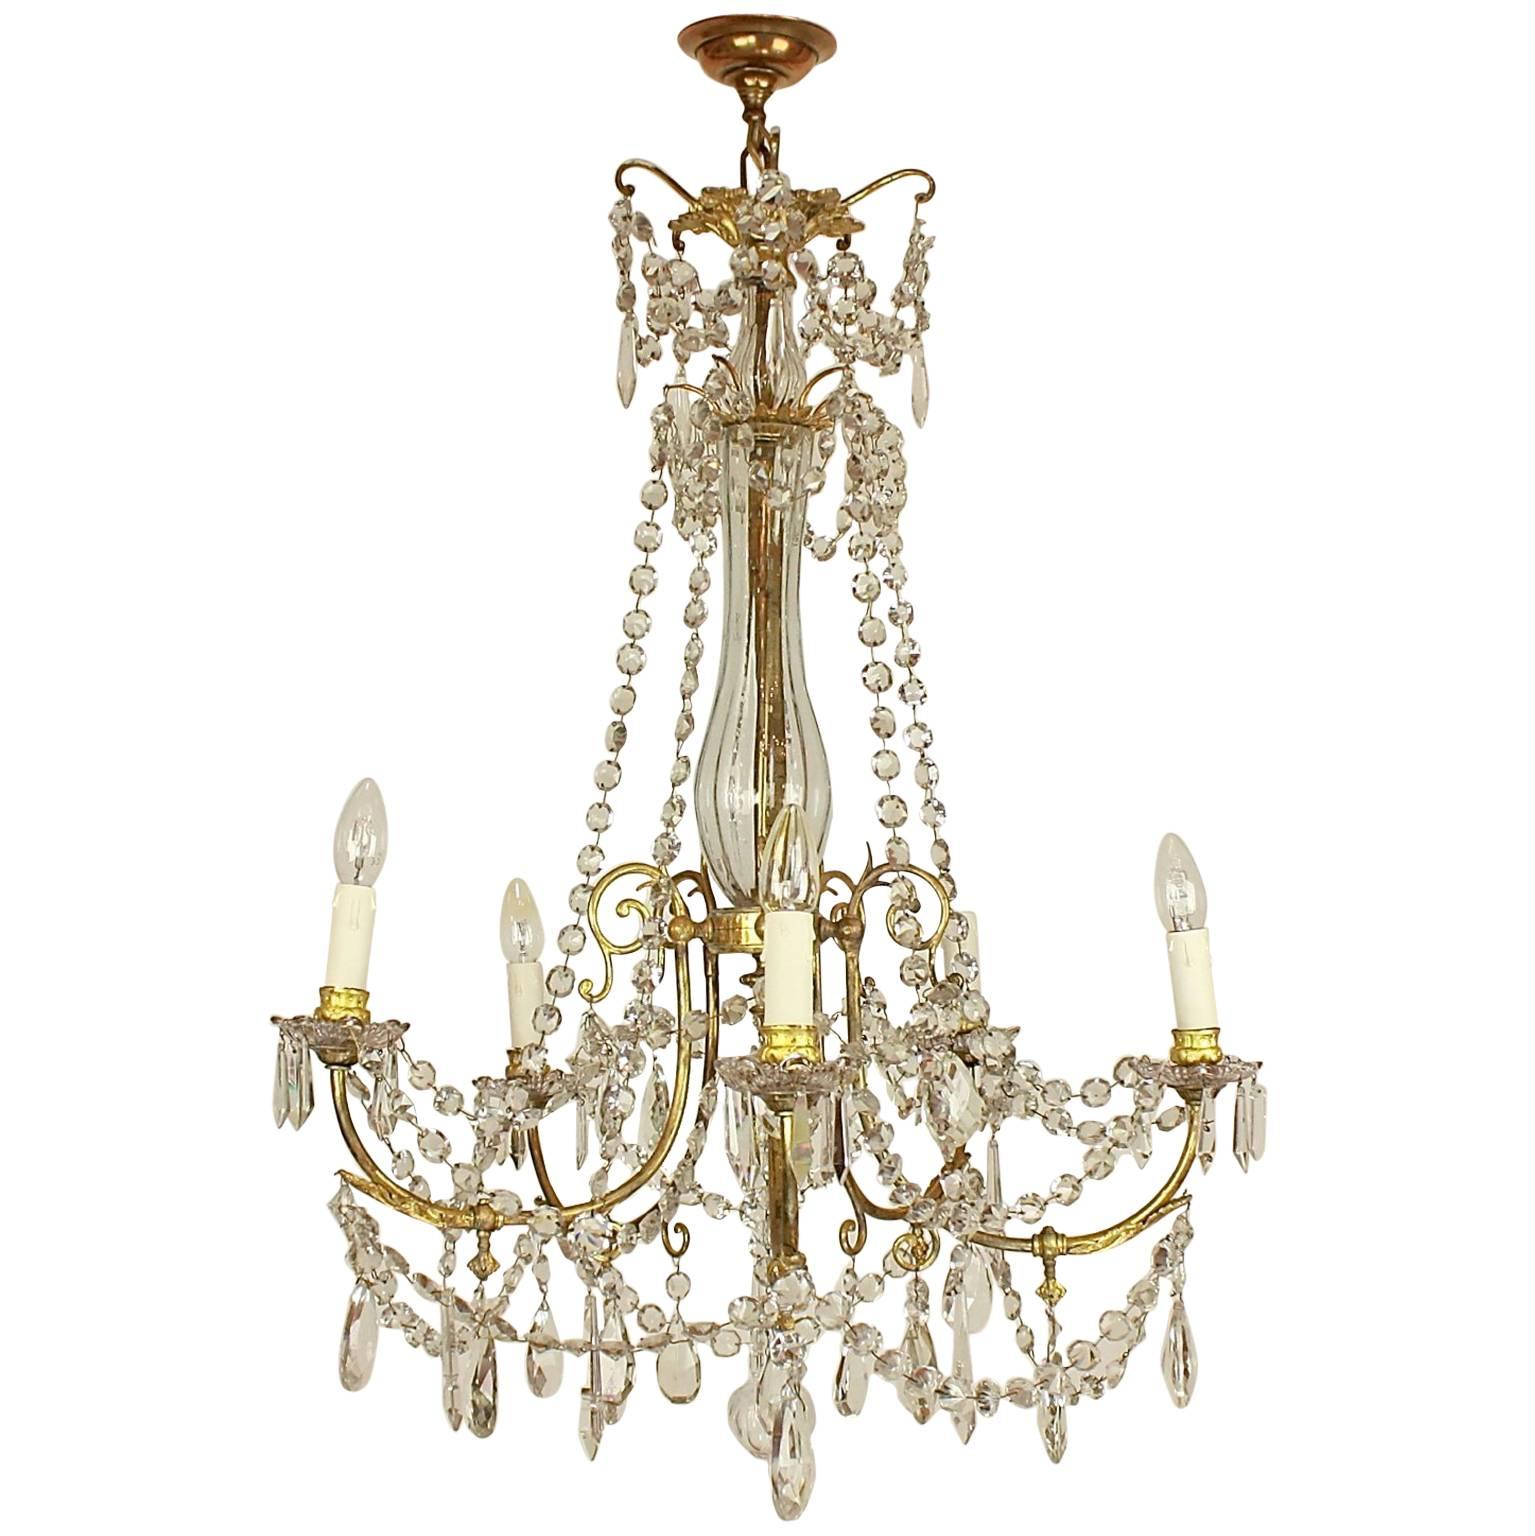 19th Century Louis XV Style Gilt-Bronze and Cut-Crystal Five-Light Chandelier